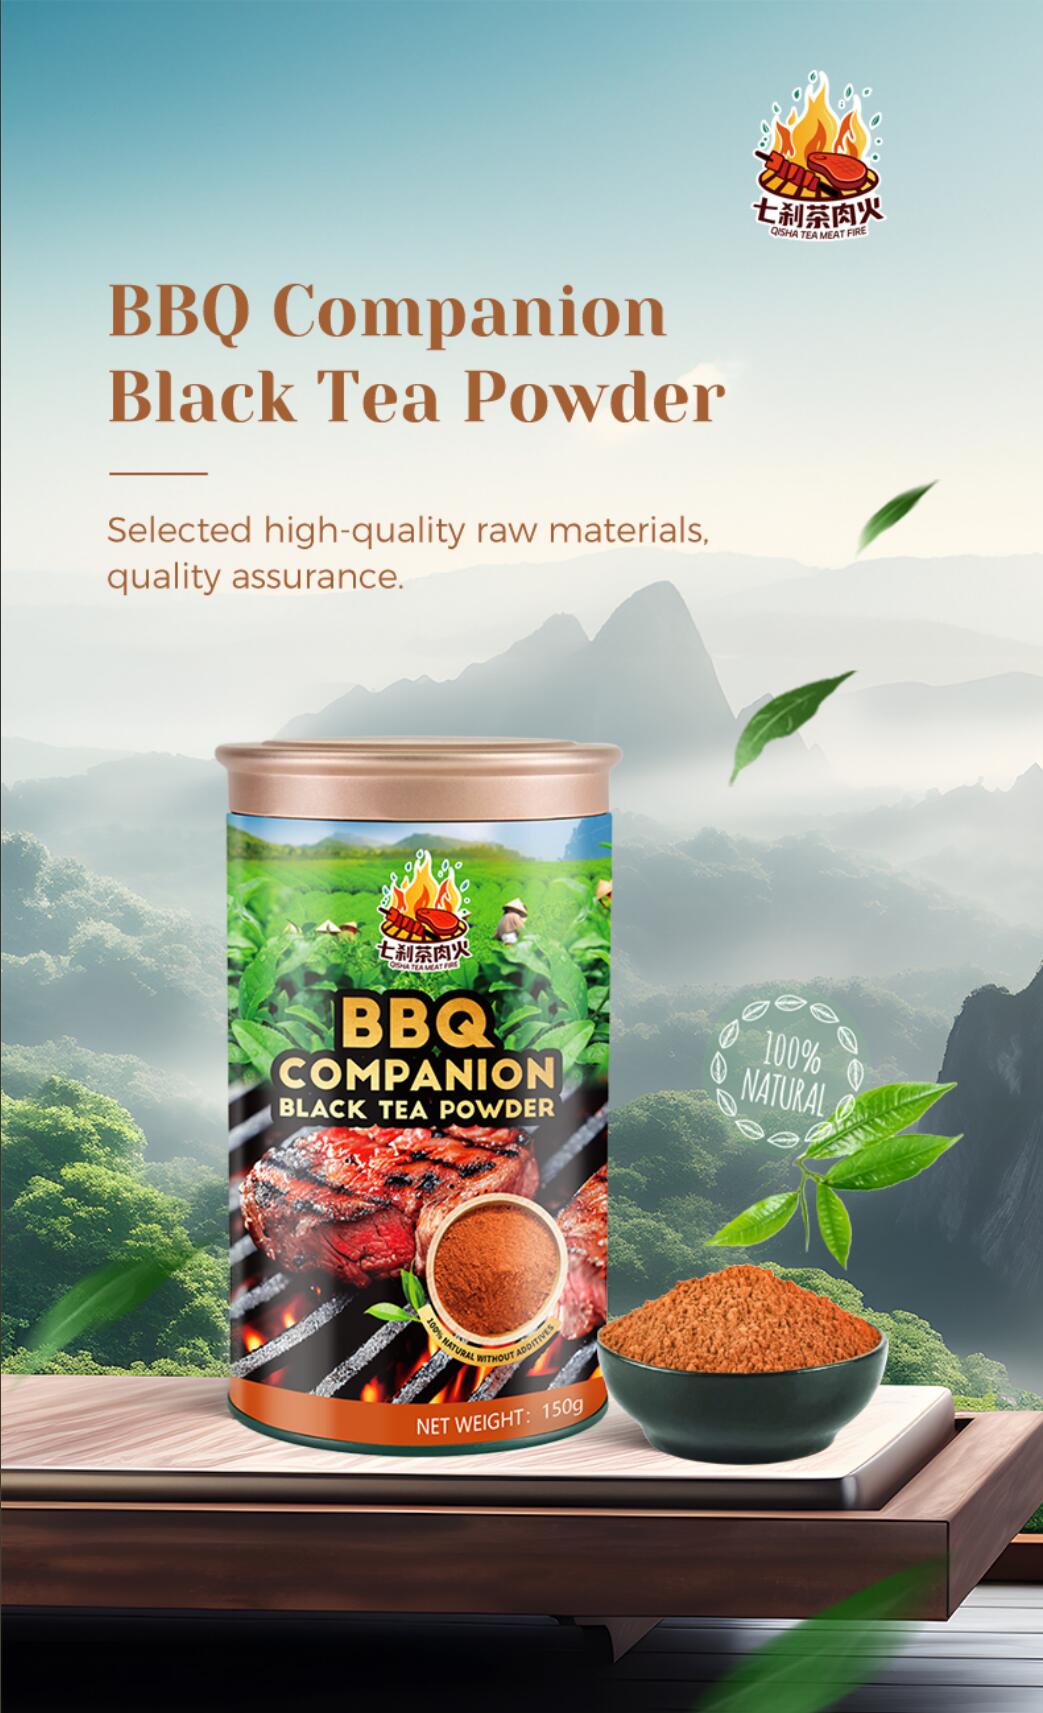 A must-have for barbecue, the magic of secret Chinese tea powder barbecue seasoning插图